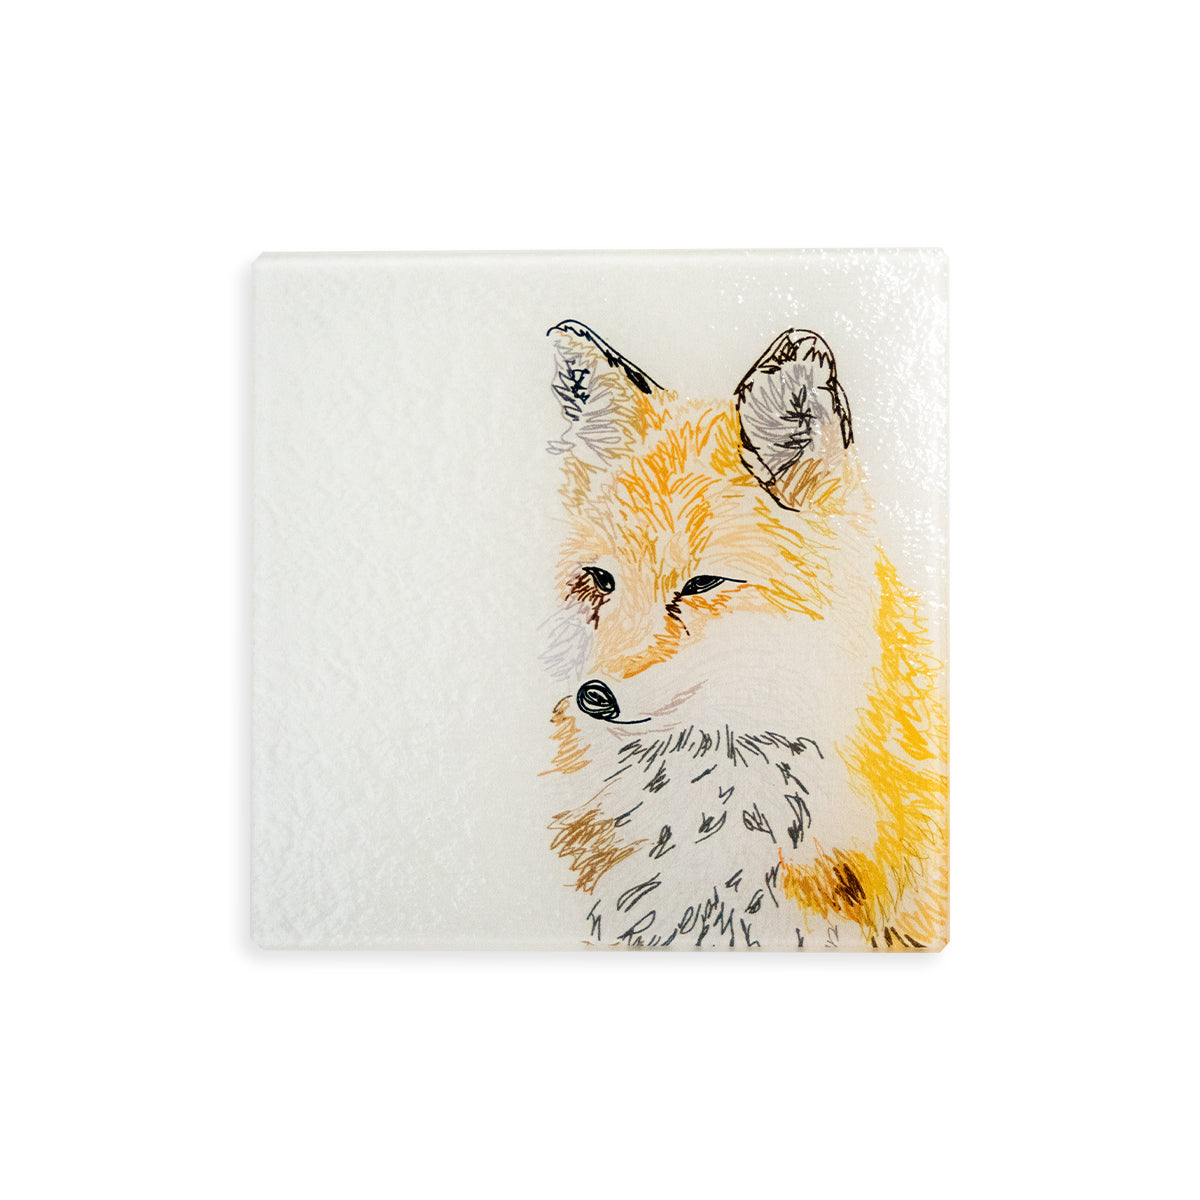 6" x 6" heat resistant tempered glass trivet with hand sketched fox illustration on the bottom right